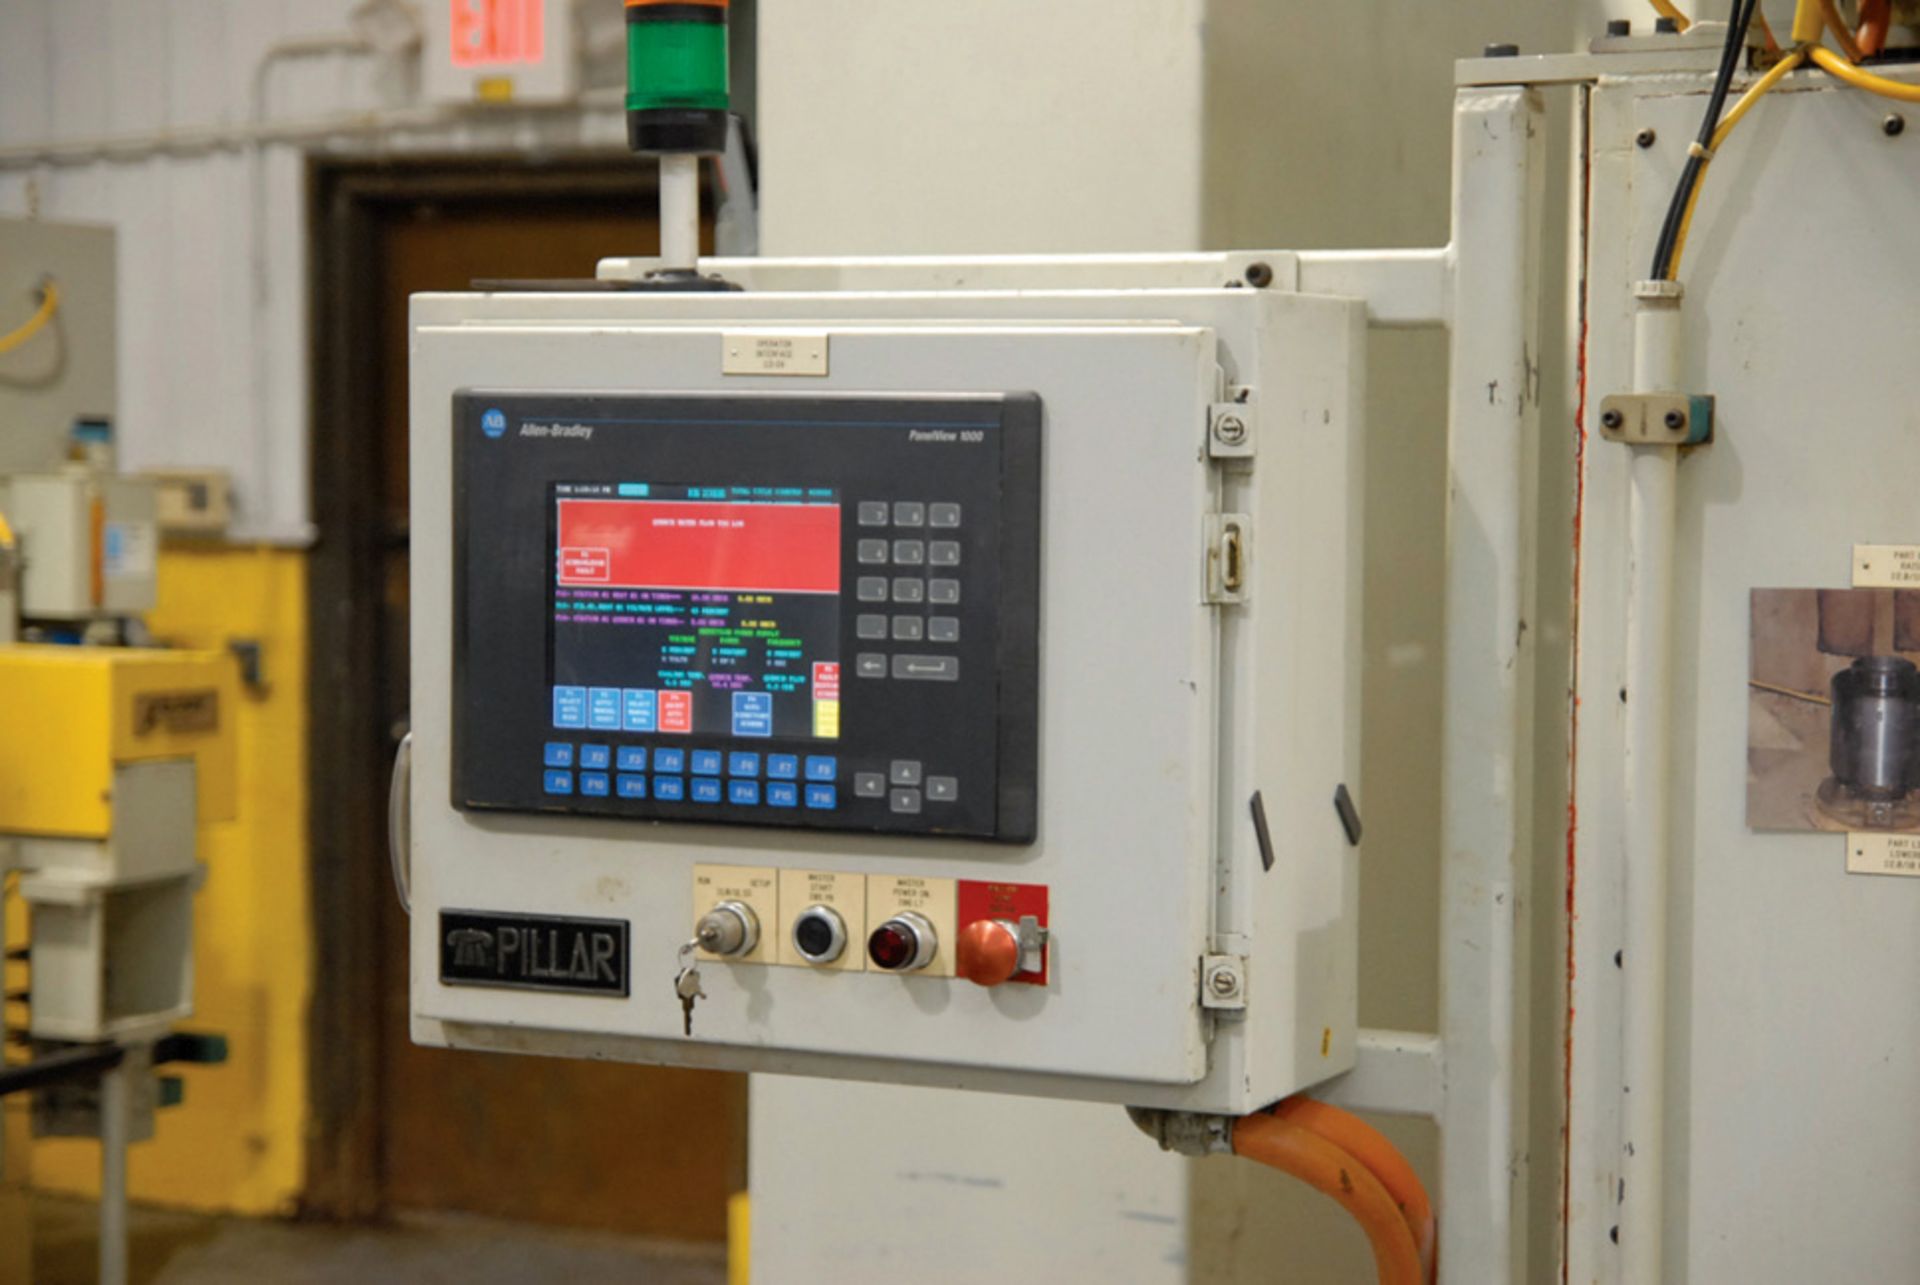 2000 Pillar Induction Heat Treat System, 50 KW, Mdl: AB7109- 503, S/N: S-0- 2920, Located In: - Image 3 of 3